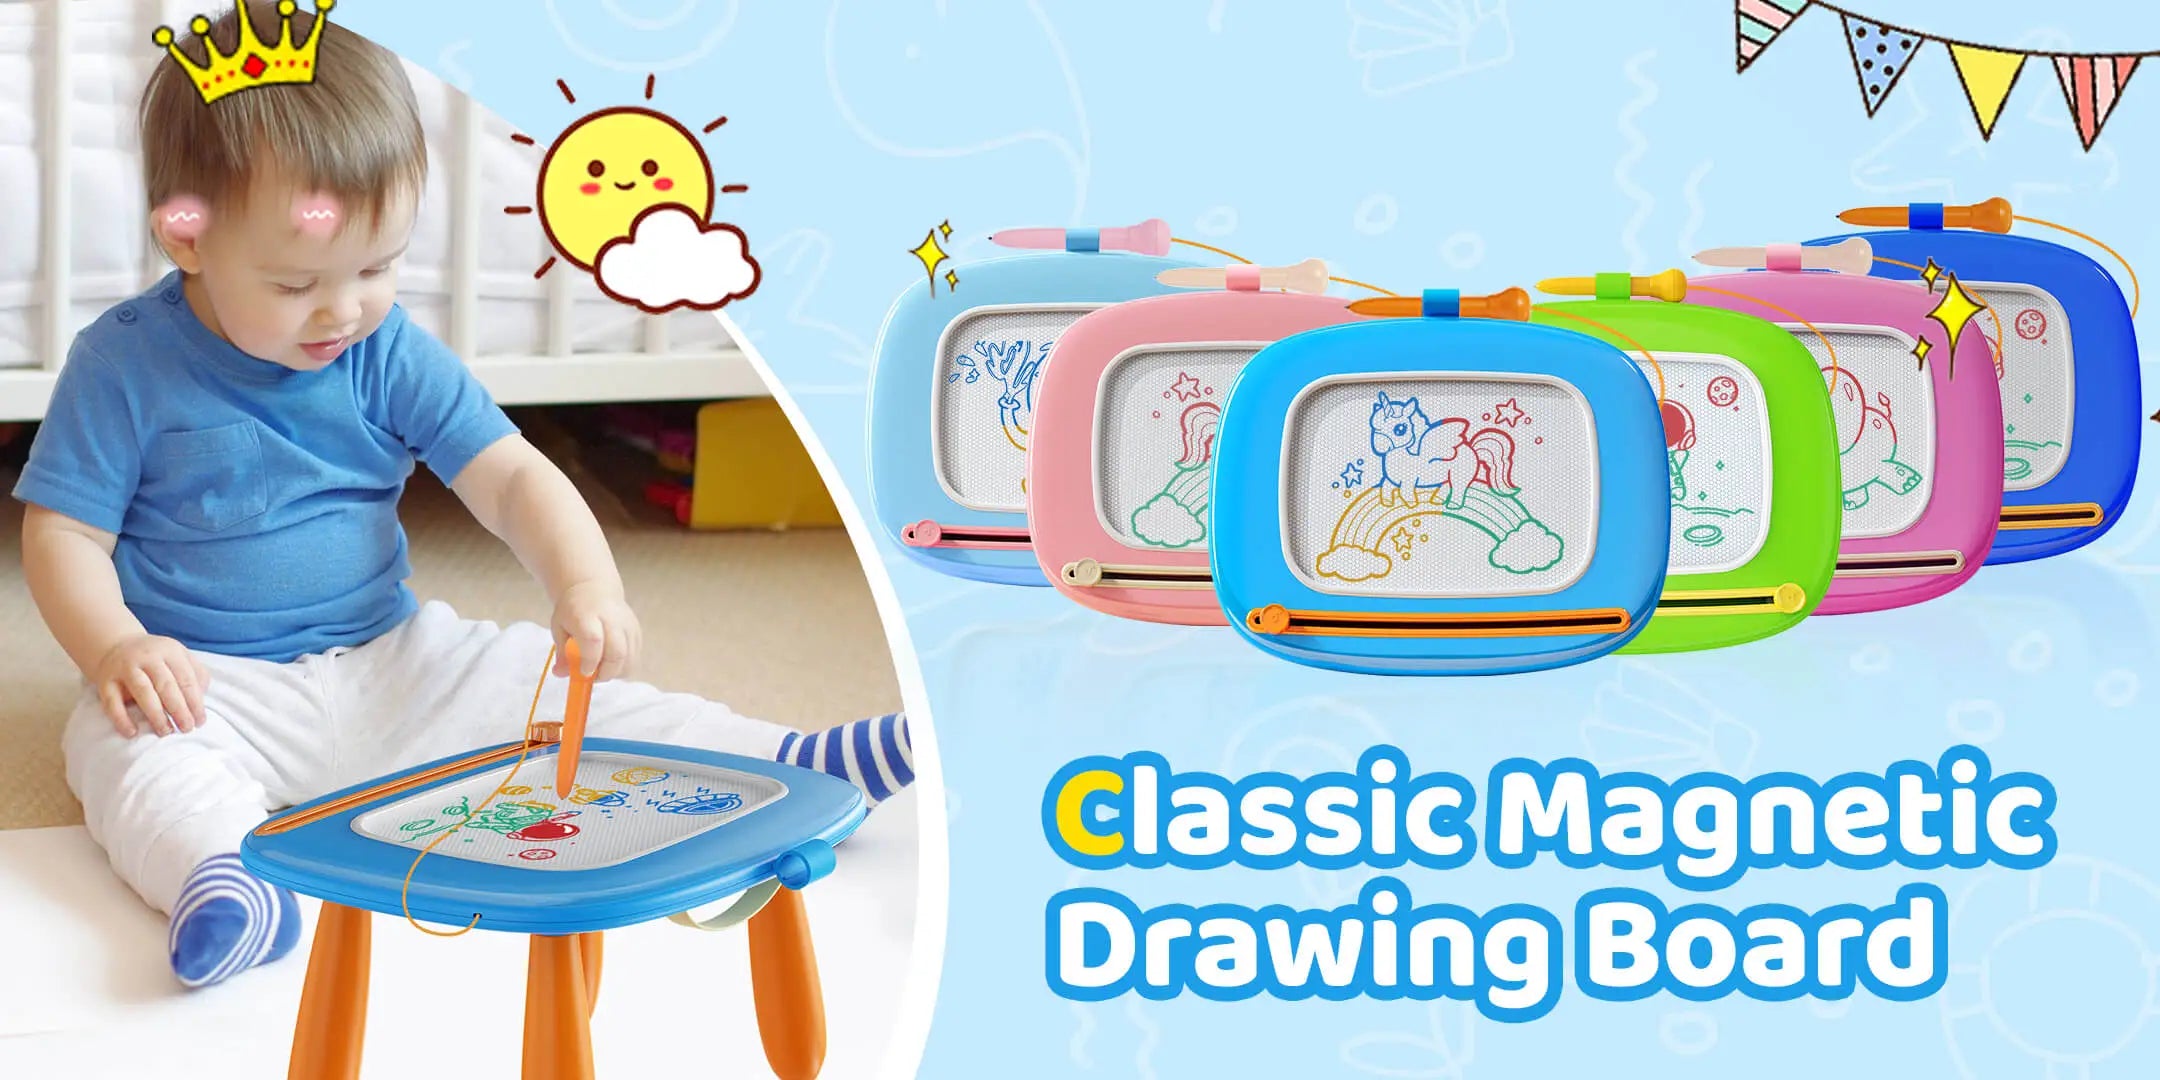 Kikidex Toddler Toys Magnetic Drawing Board leaning education toys